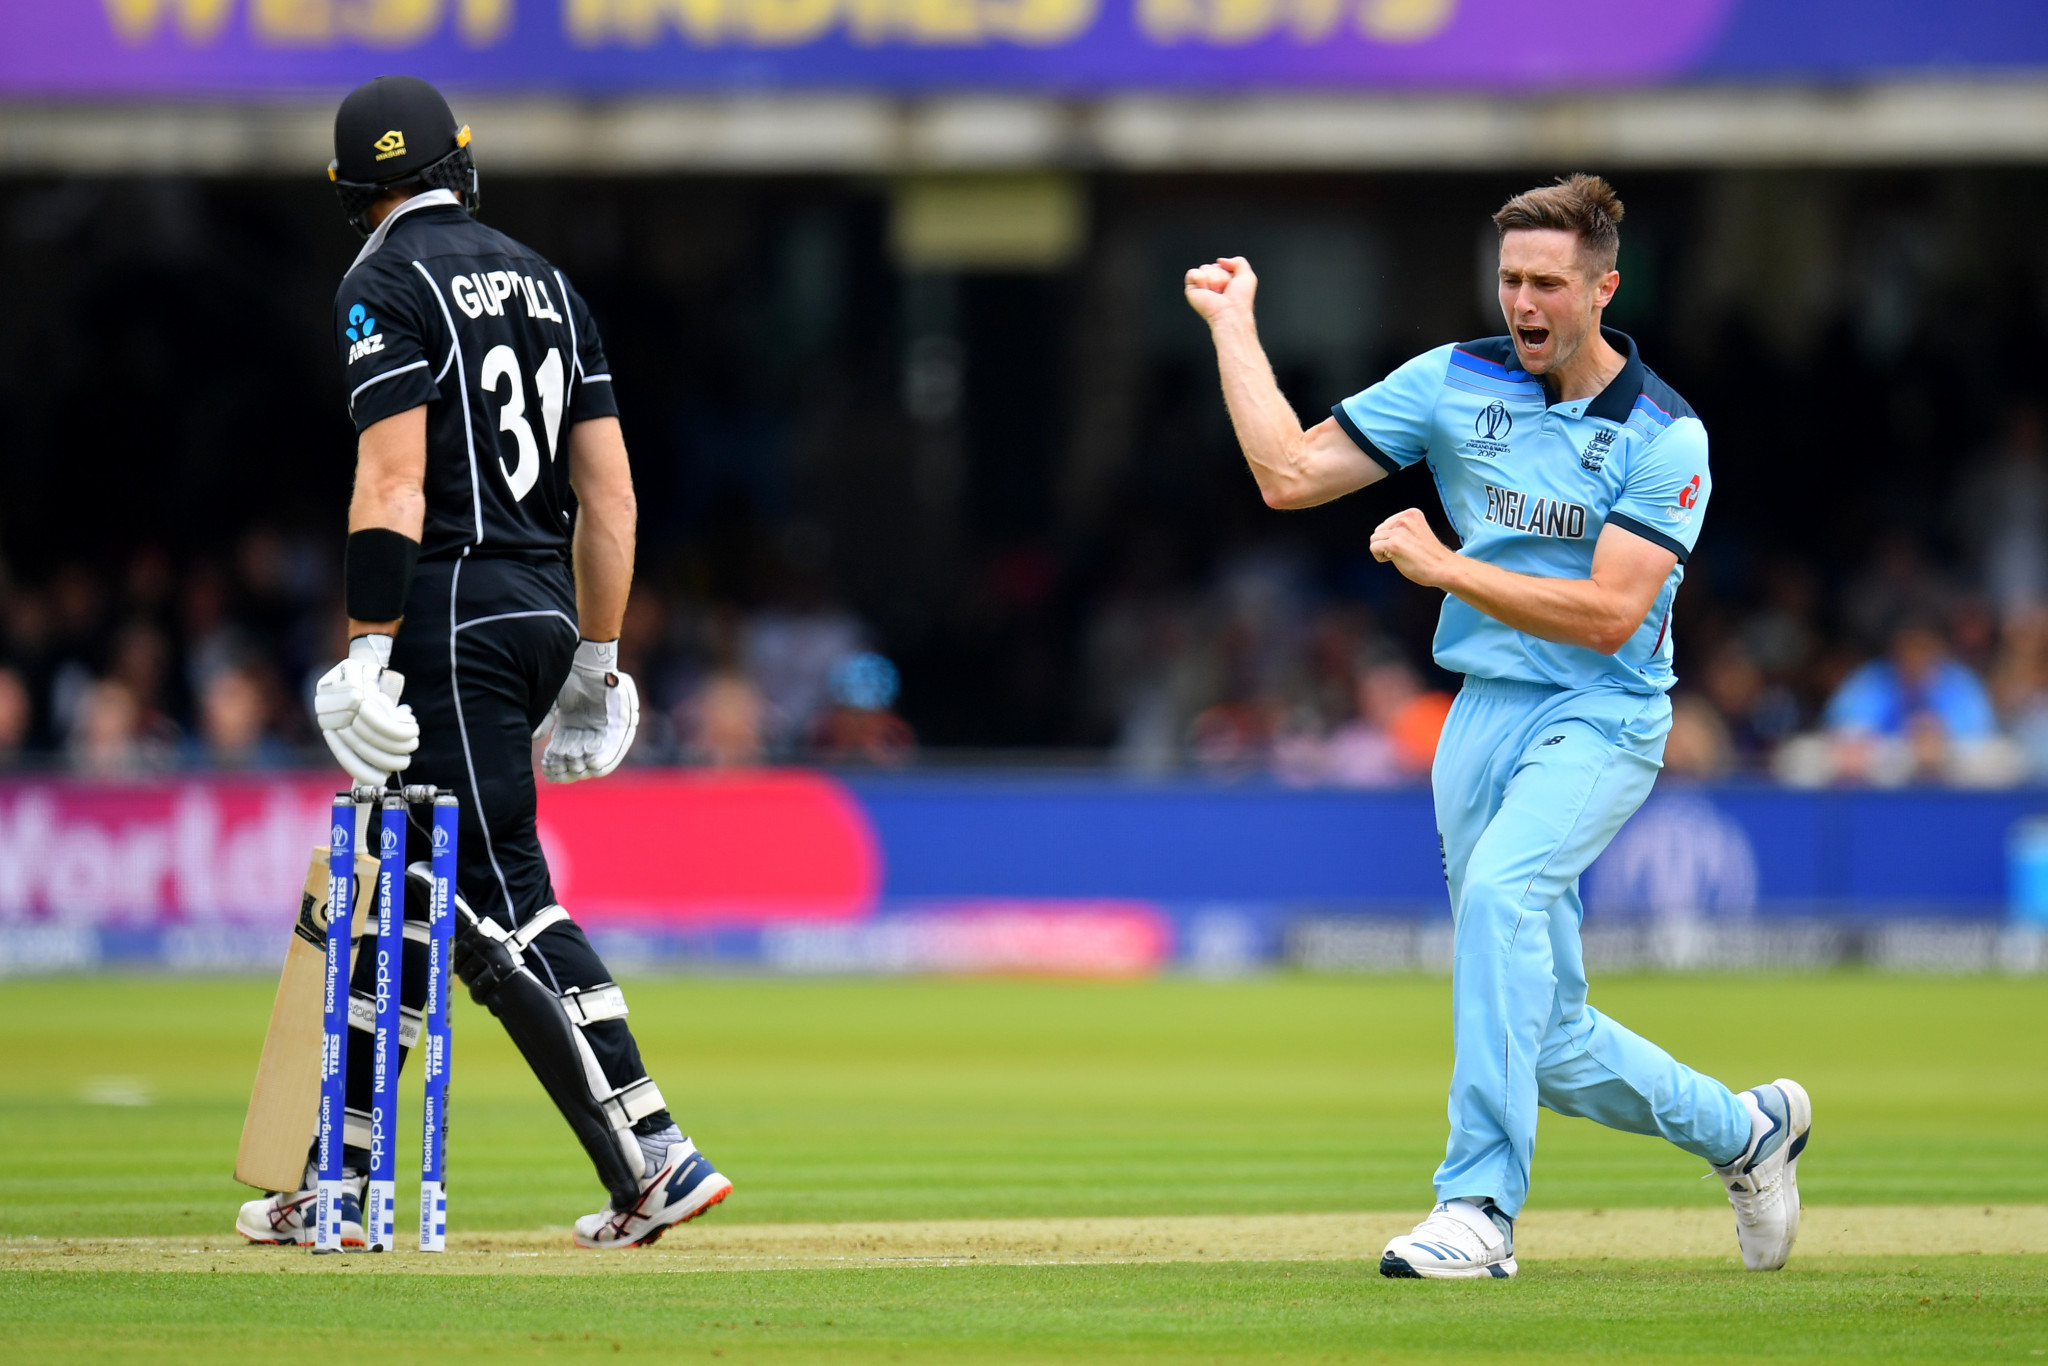 Chris Woakes celebrates one of his three wickets as England restricted New Zealand to a total of 241 runs - a total that his side equalled to set up the dramatic climax to the match ©Getty Images